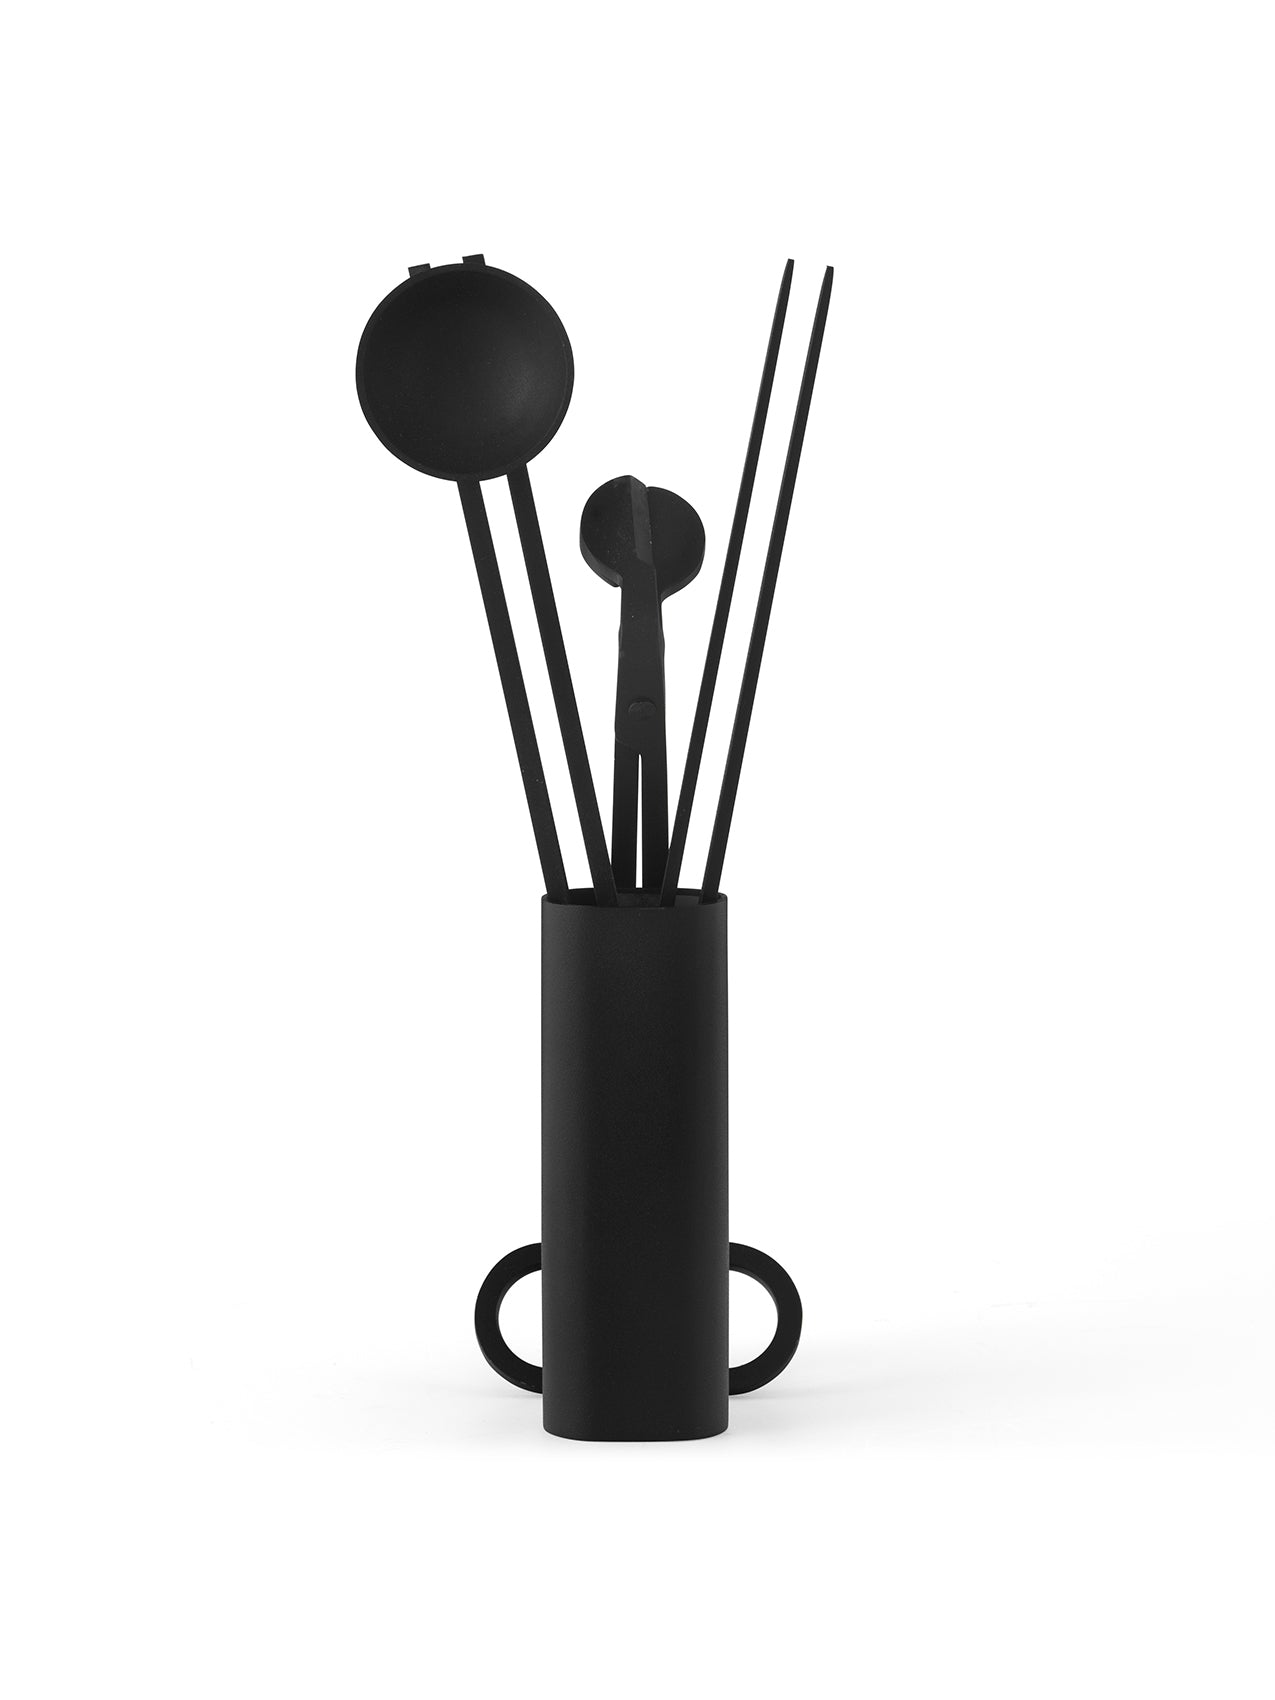 Black Candle Care Kit, Candle Tools, Complete Candle Care Kit